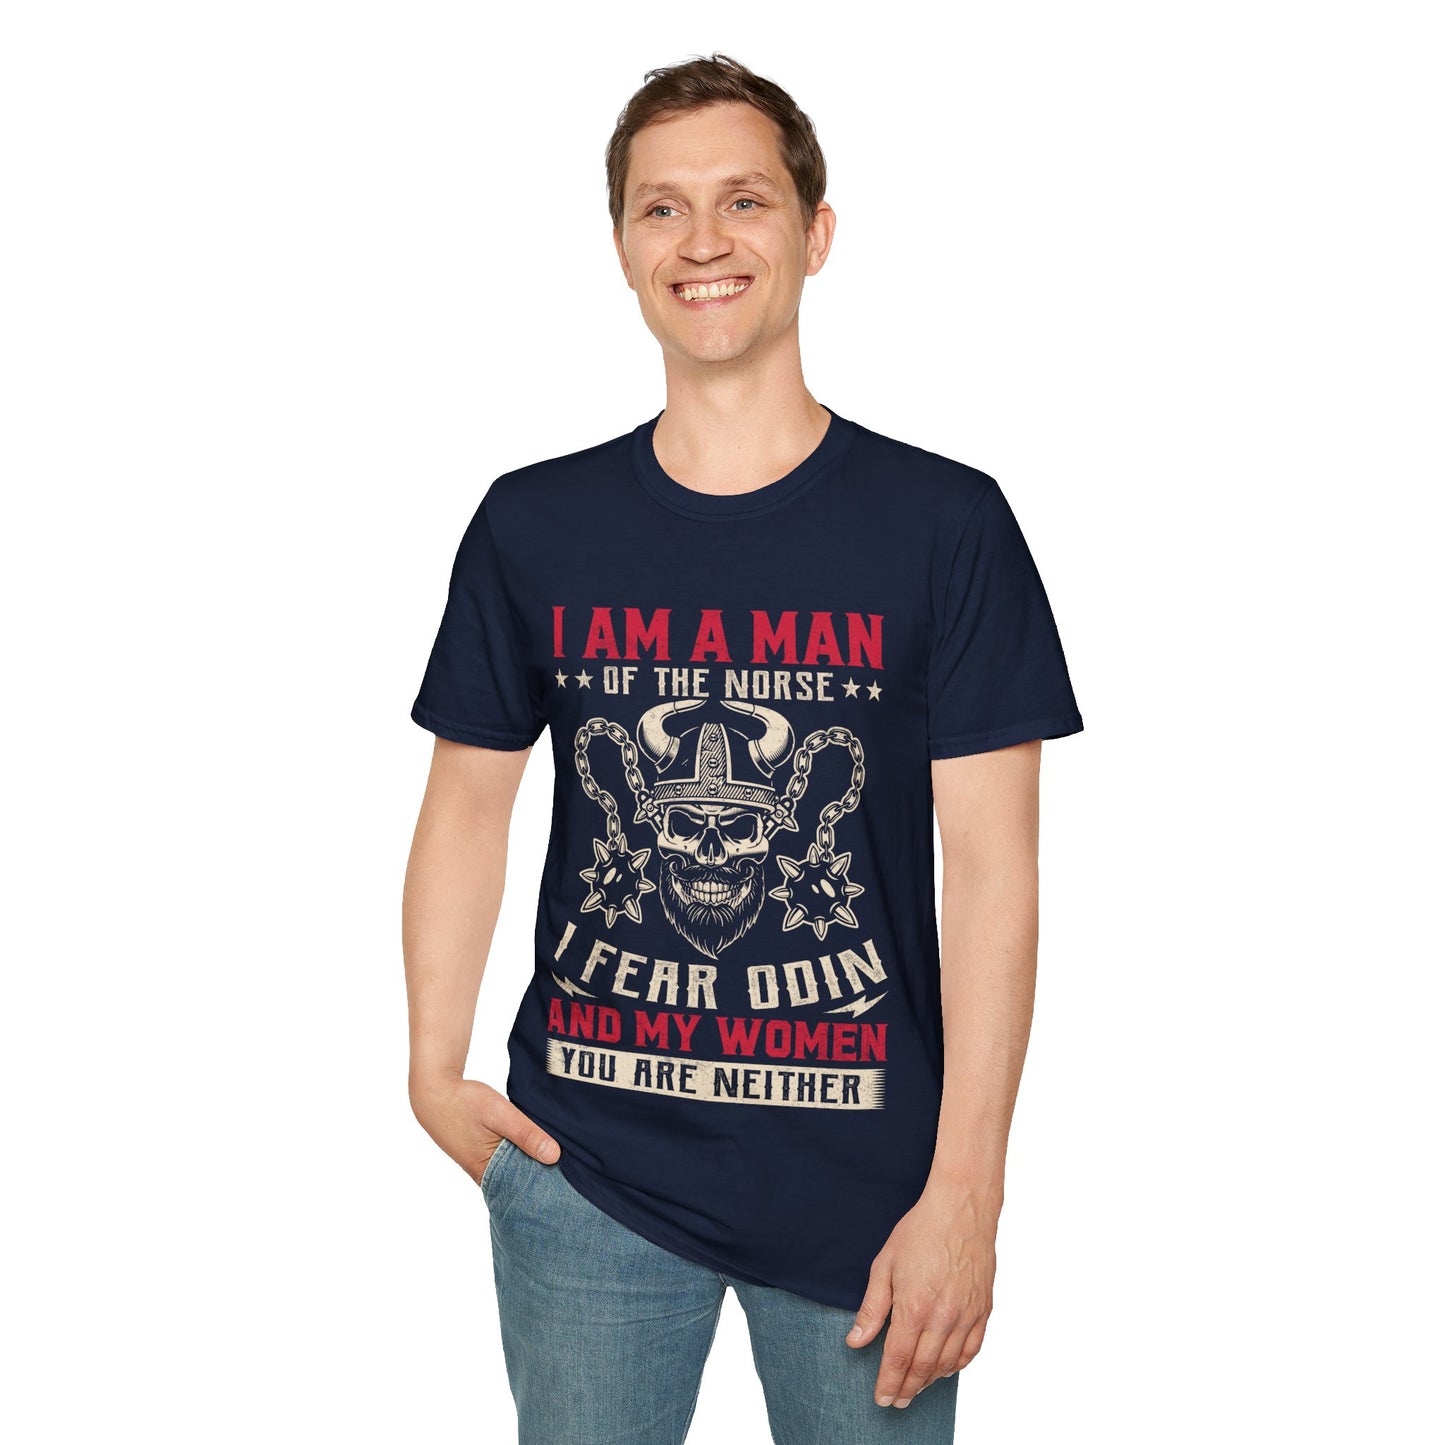 I Am A Man Of The Norse I Fear Odin And My Women You Are Neither T-Shirt